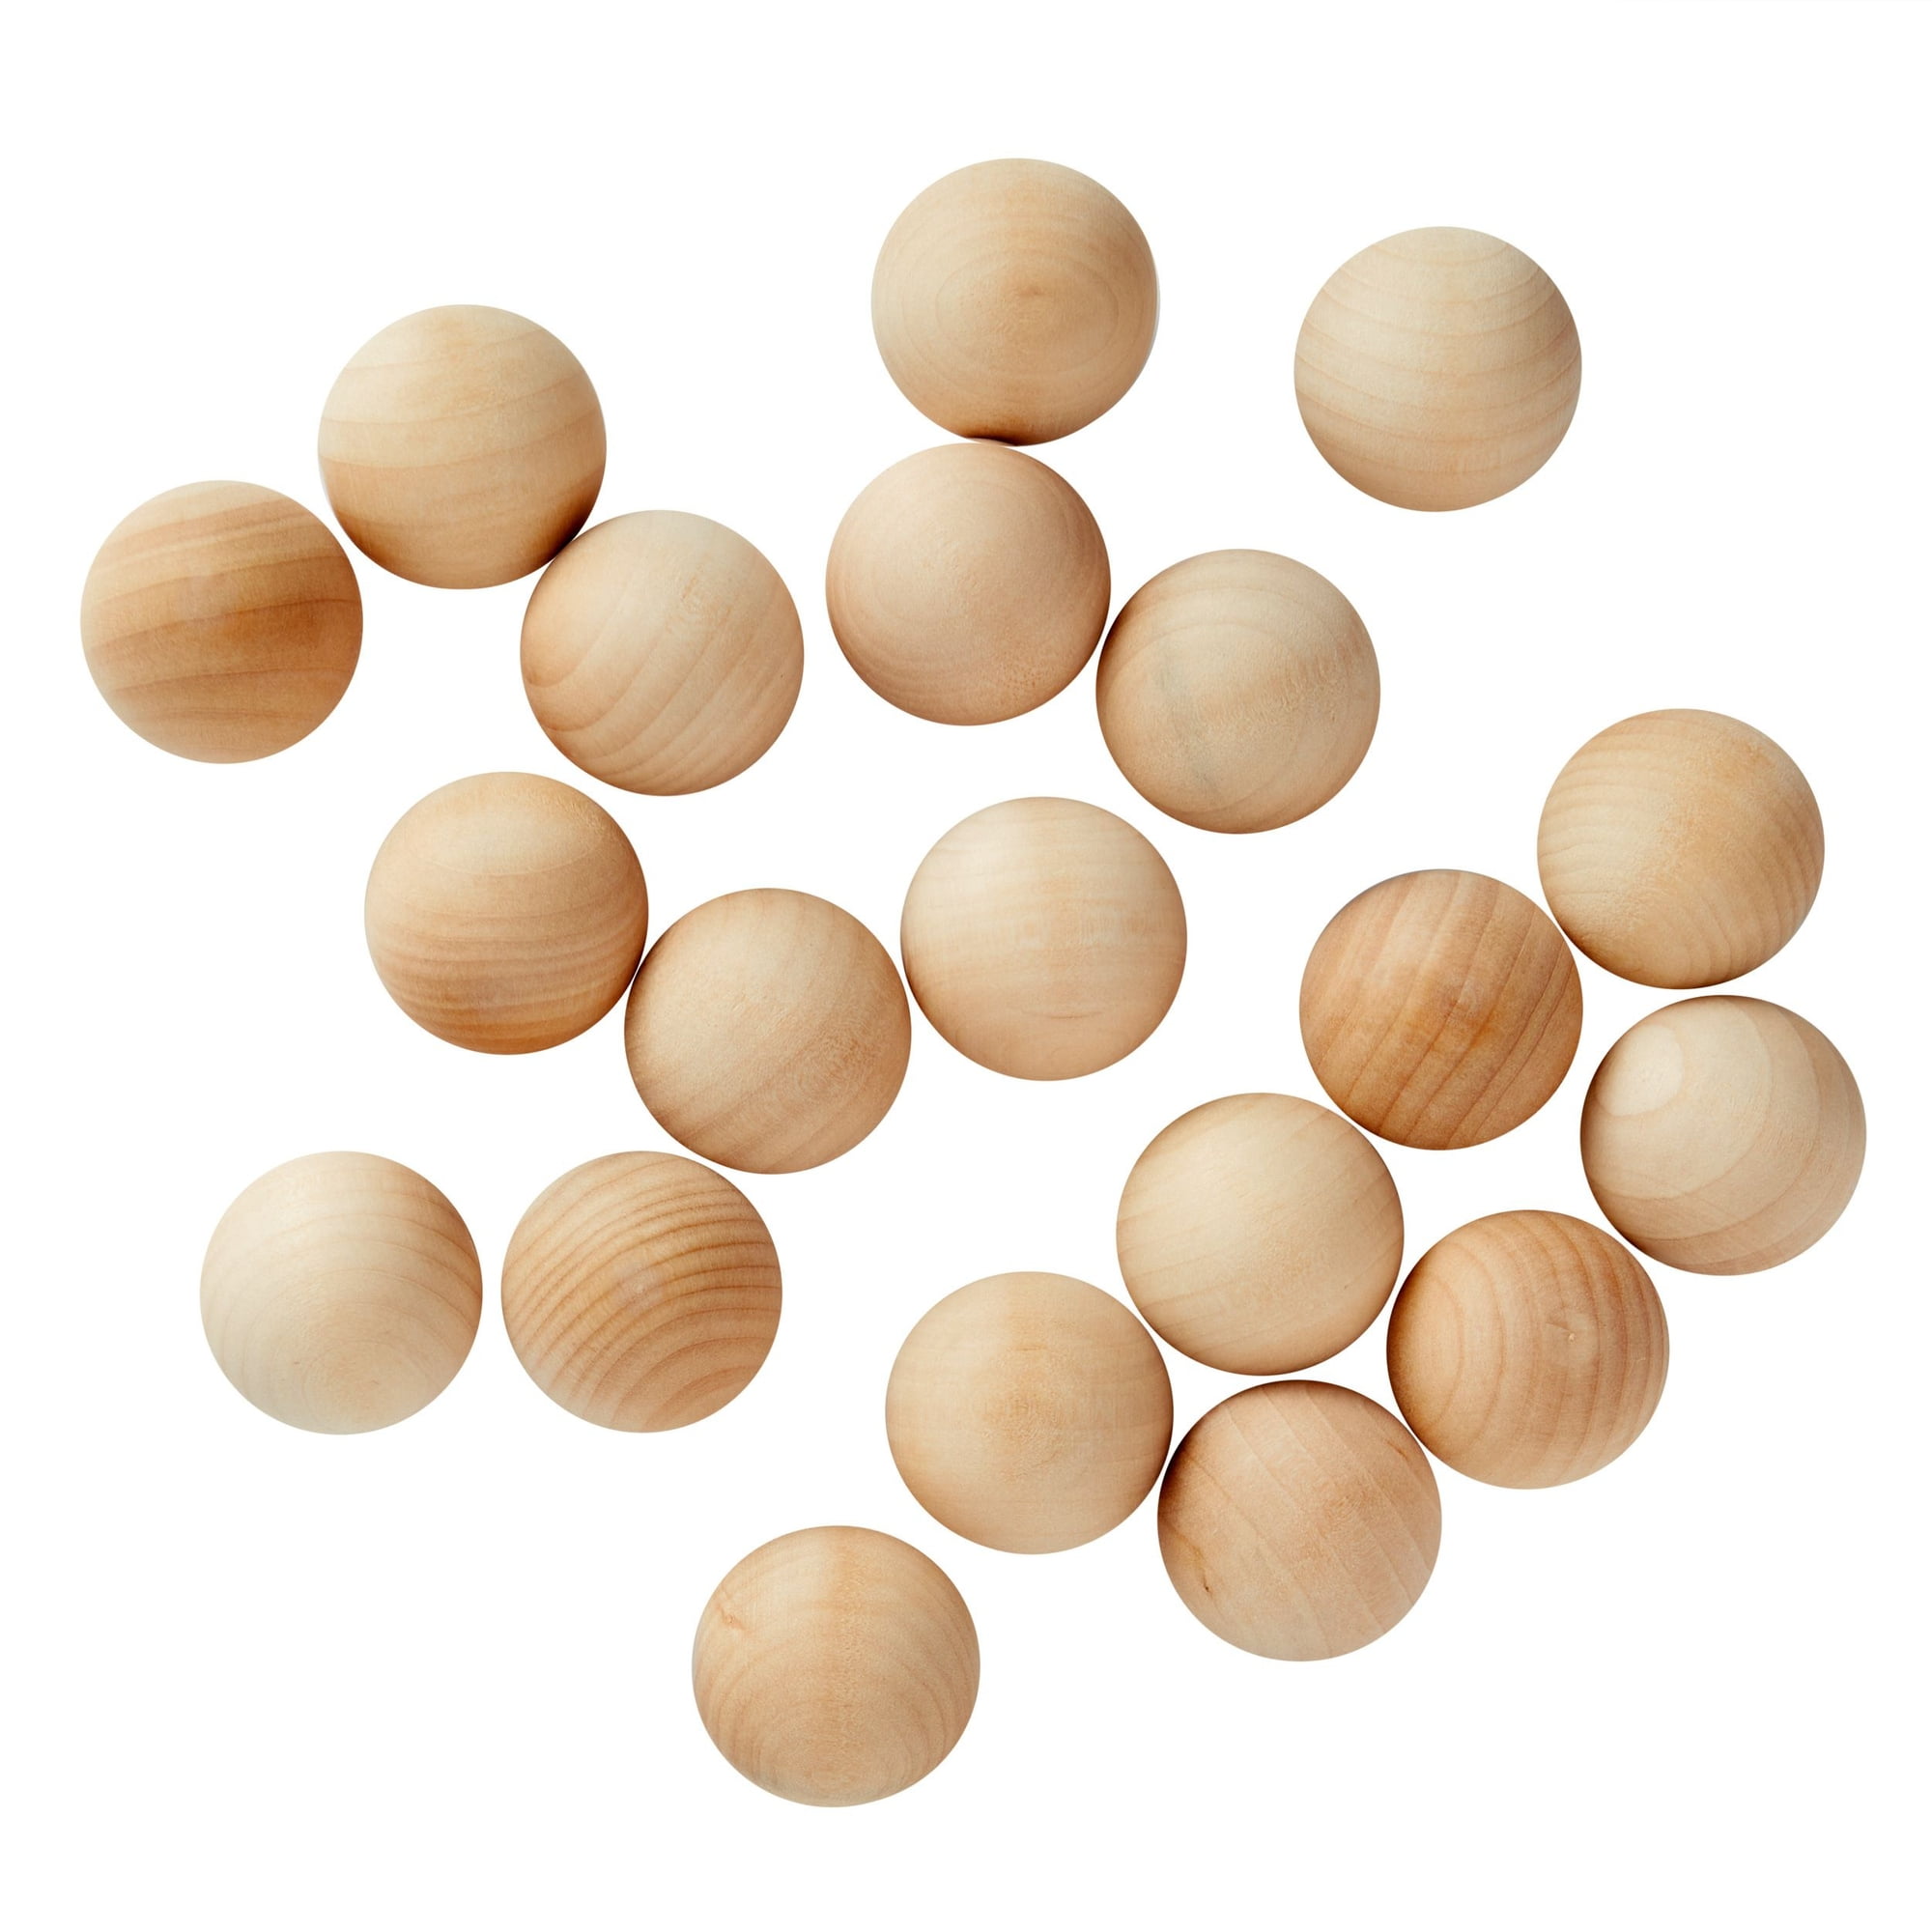 Perfeclan Round Wooden Ball Bag Of Unfinished Wood Round Balls Hardwood  Beads Small Wooden Balls For Crafts And Building Toy Accessories For  Children